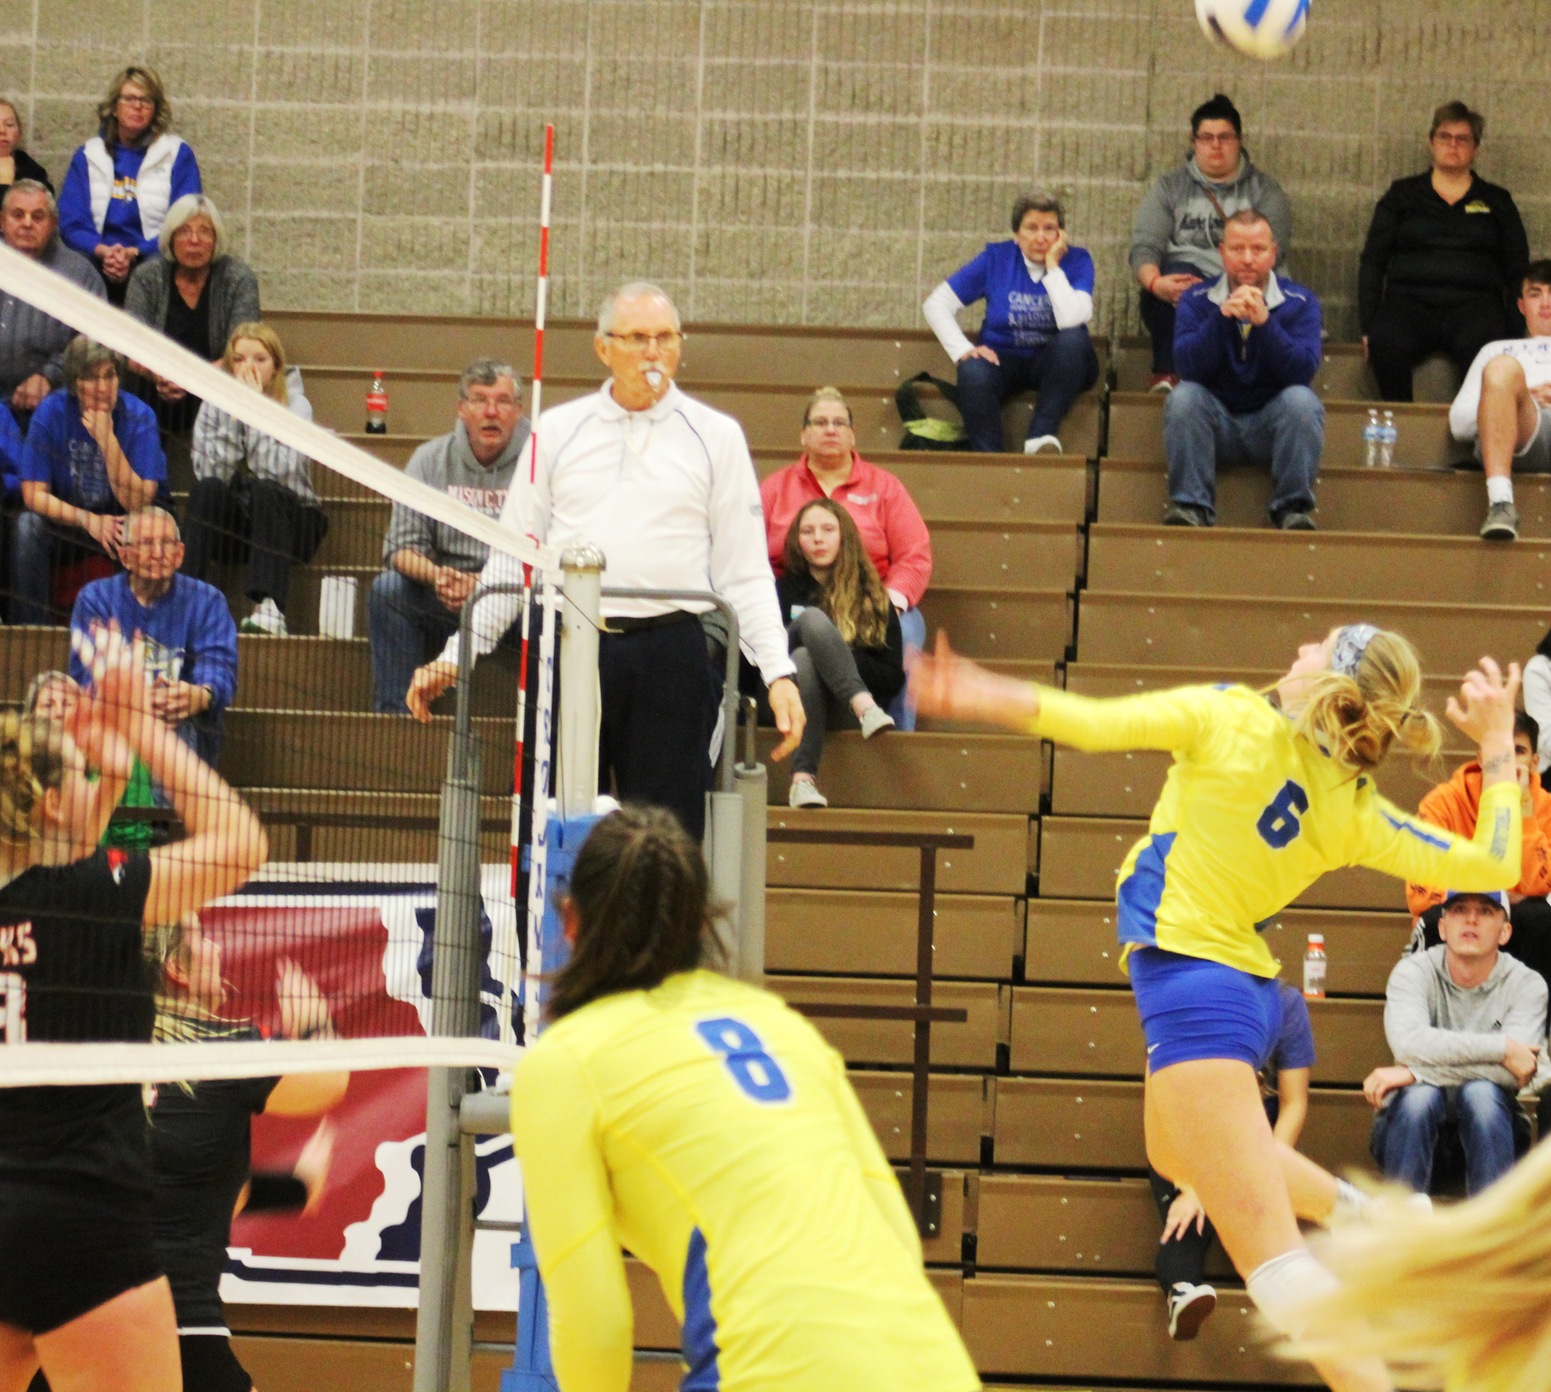 Kennedy Meister hits the ball over the net in Sunday's regional title match against Northeast CC.